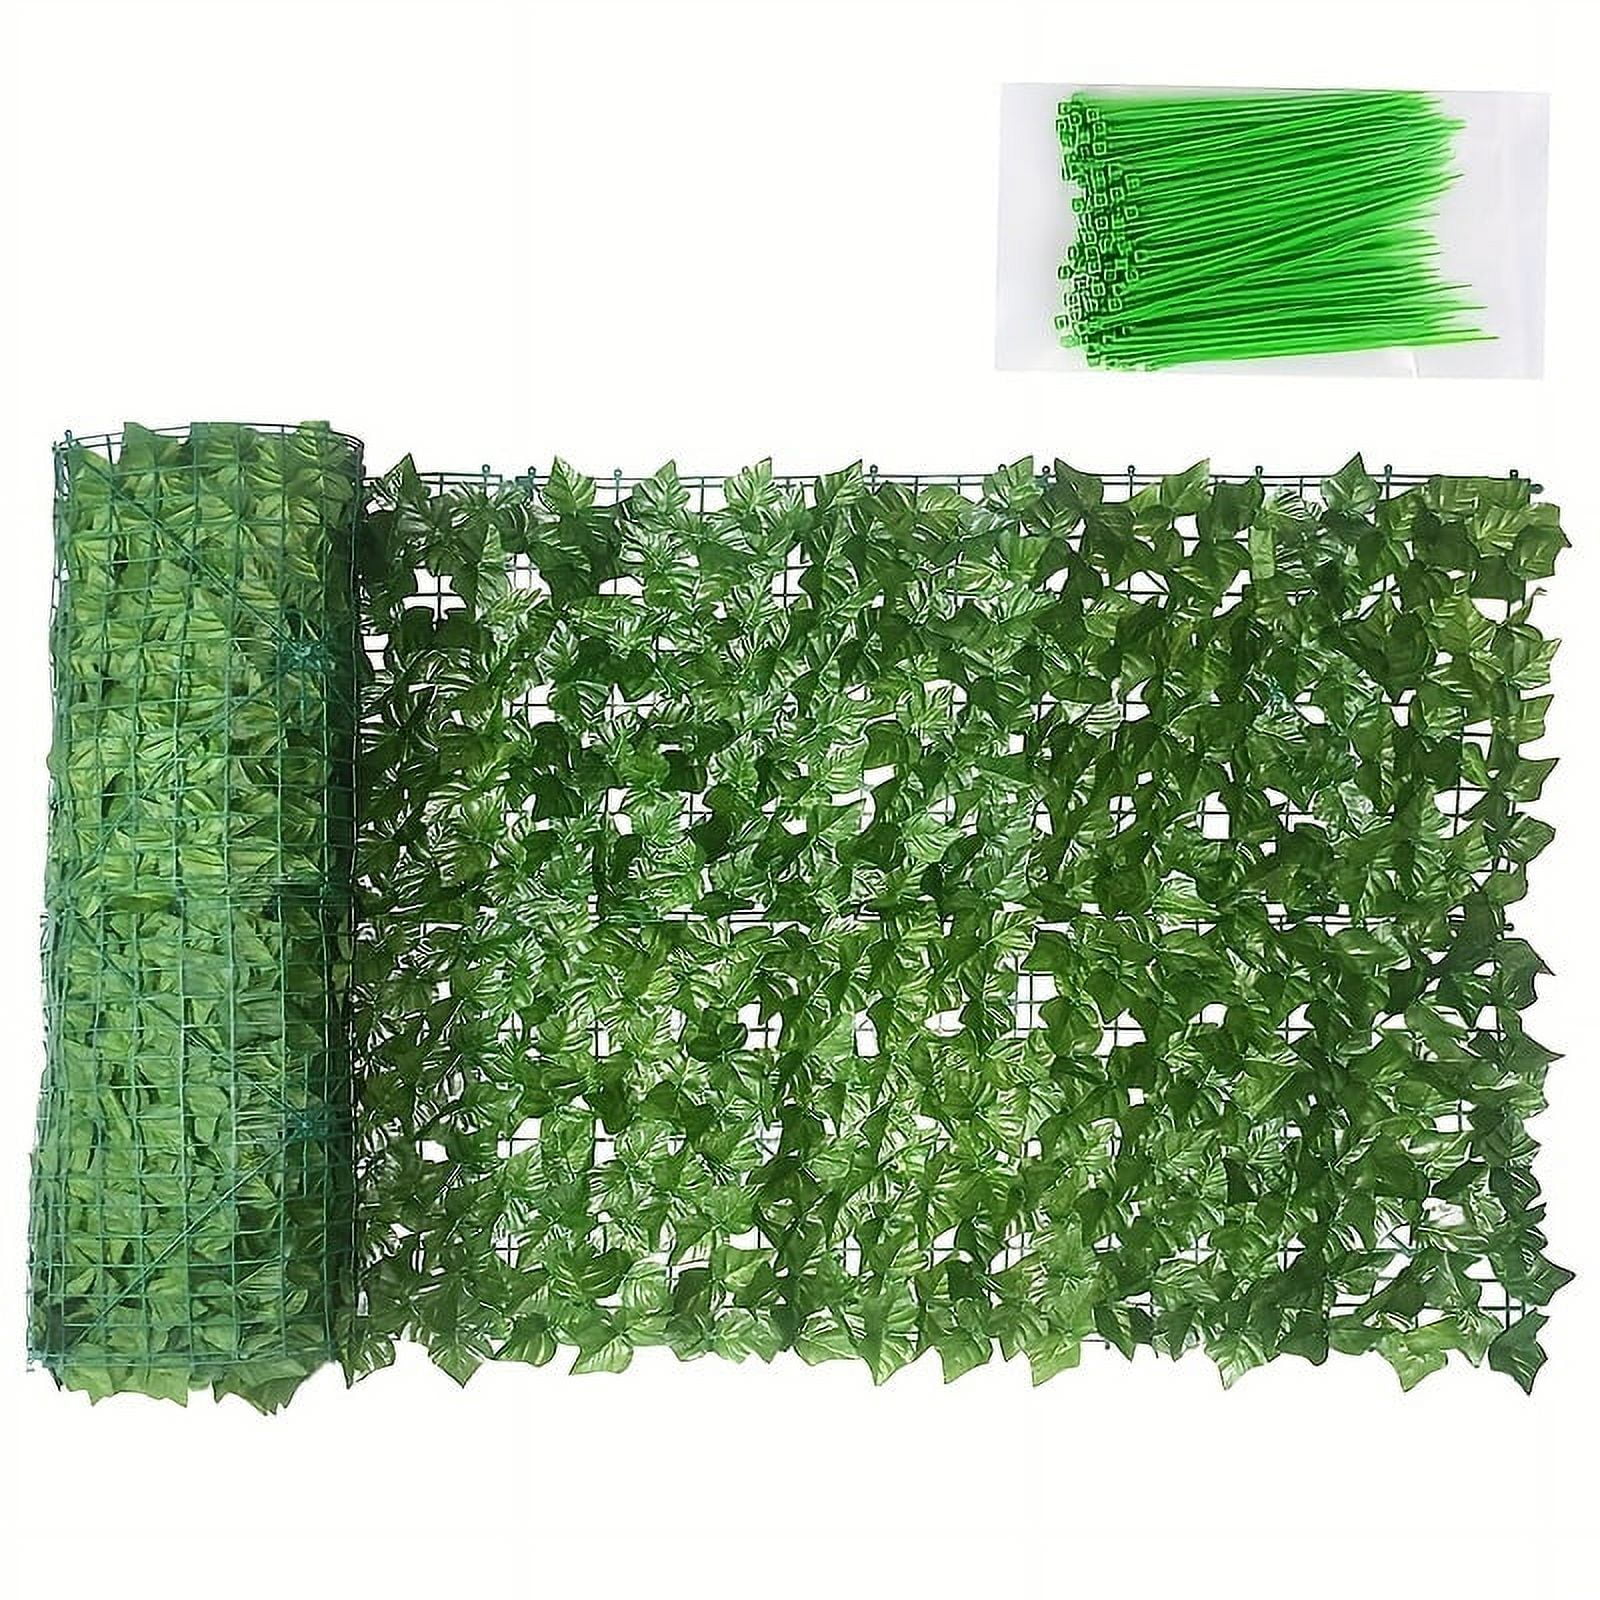 Hiziwimi 118x19 in Artifical Ivy Privacy Fence Screen, Faux Ivy Vine ...